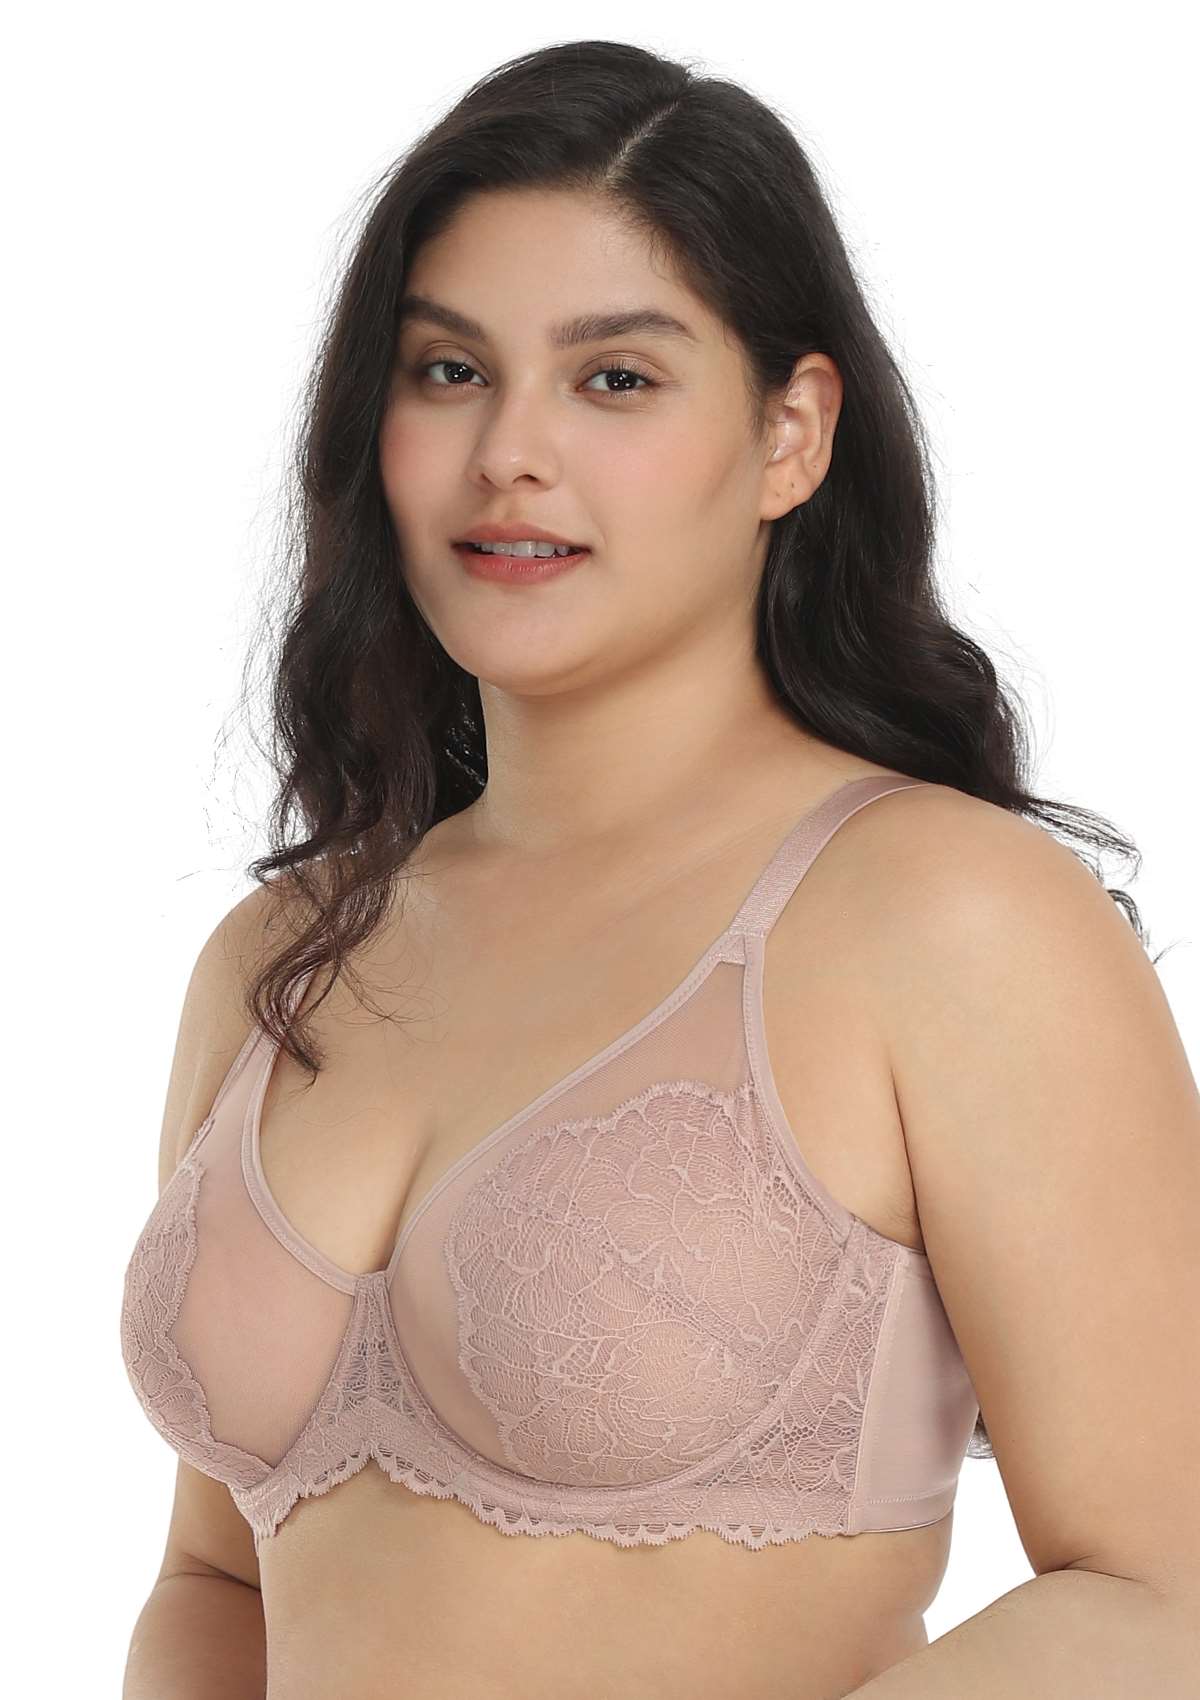 HSIA Blossom Lace Bra And Panties Set: Best Bra For Large Busts - Dark Pink / 42 / G